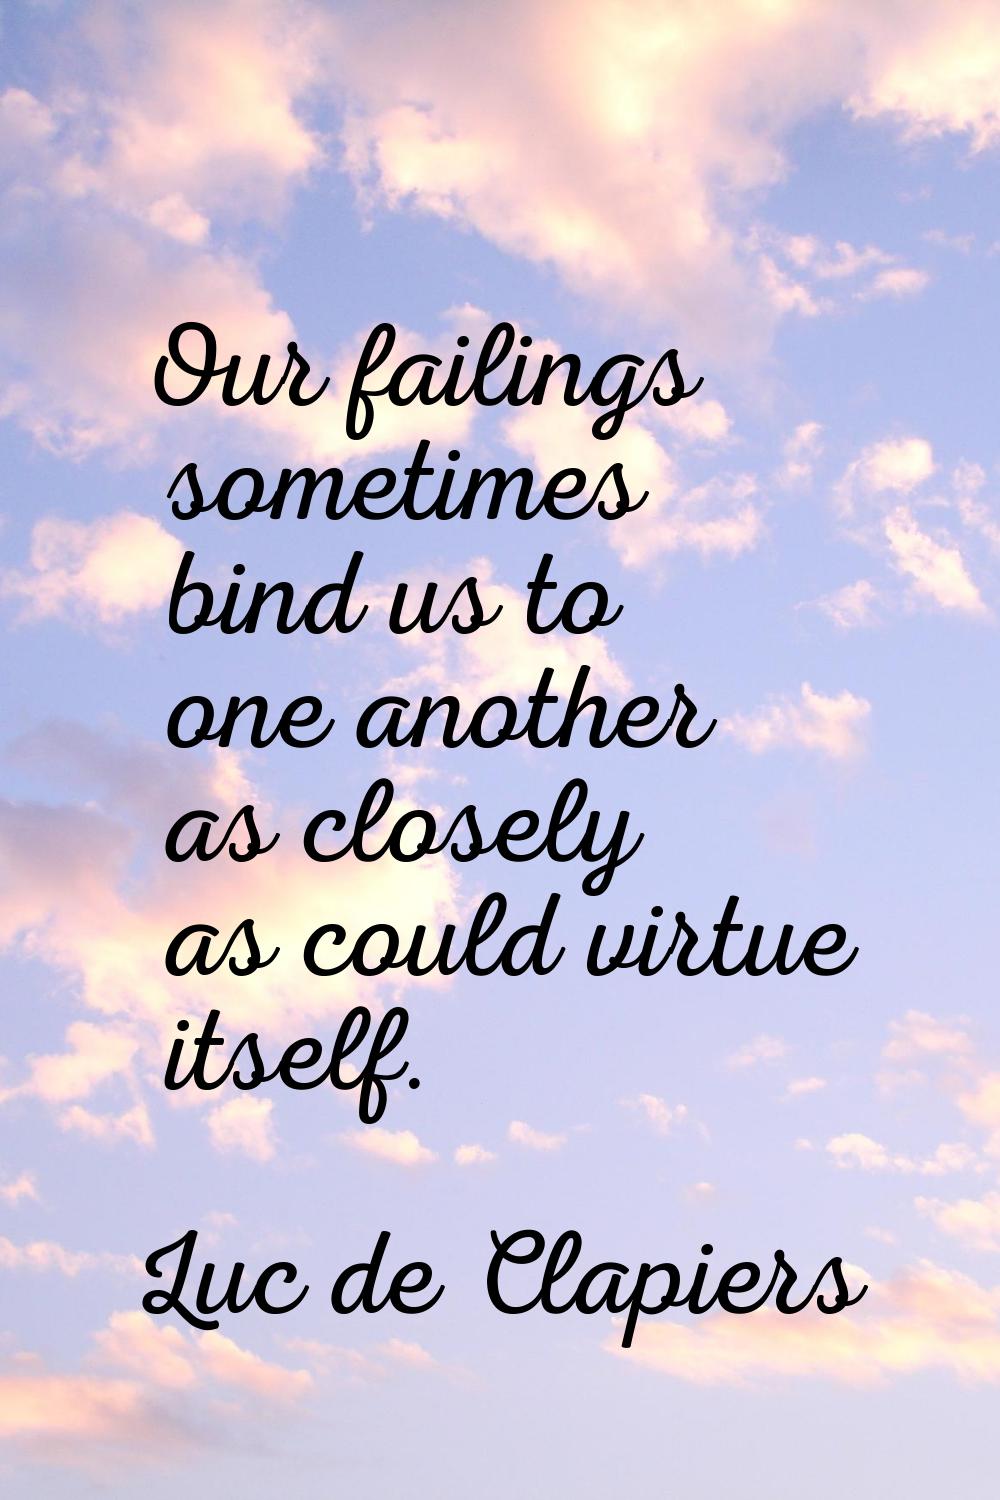 Our failings sometimes bind us to one another as closely as could virtue itself.